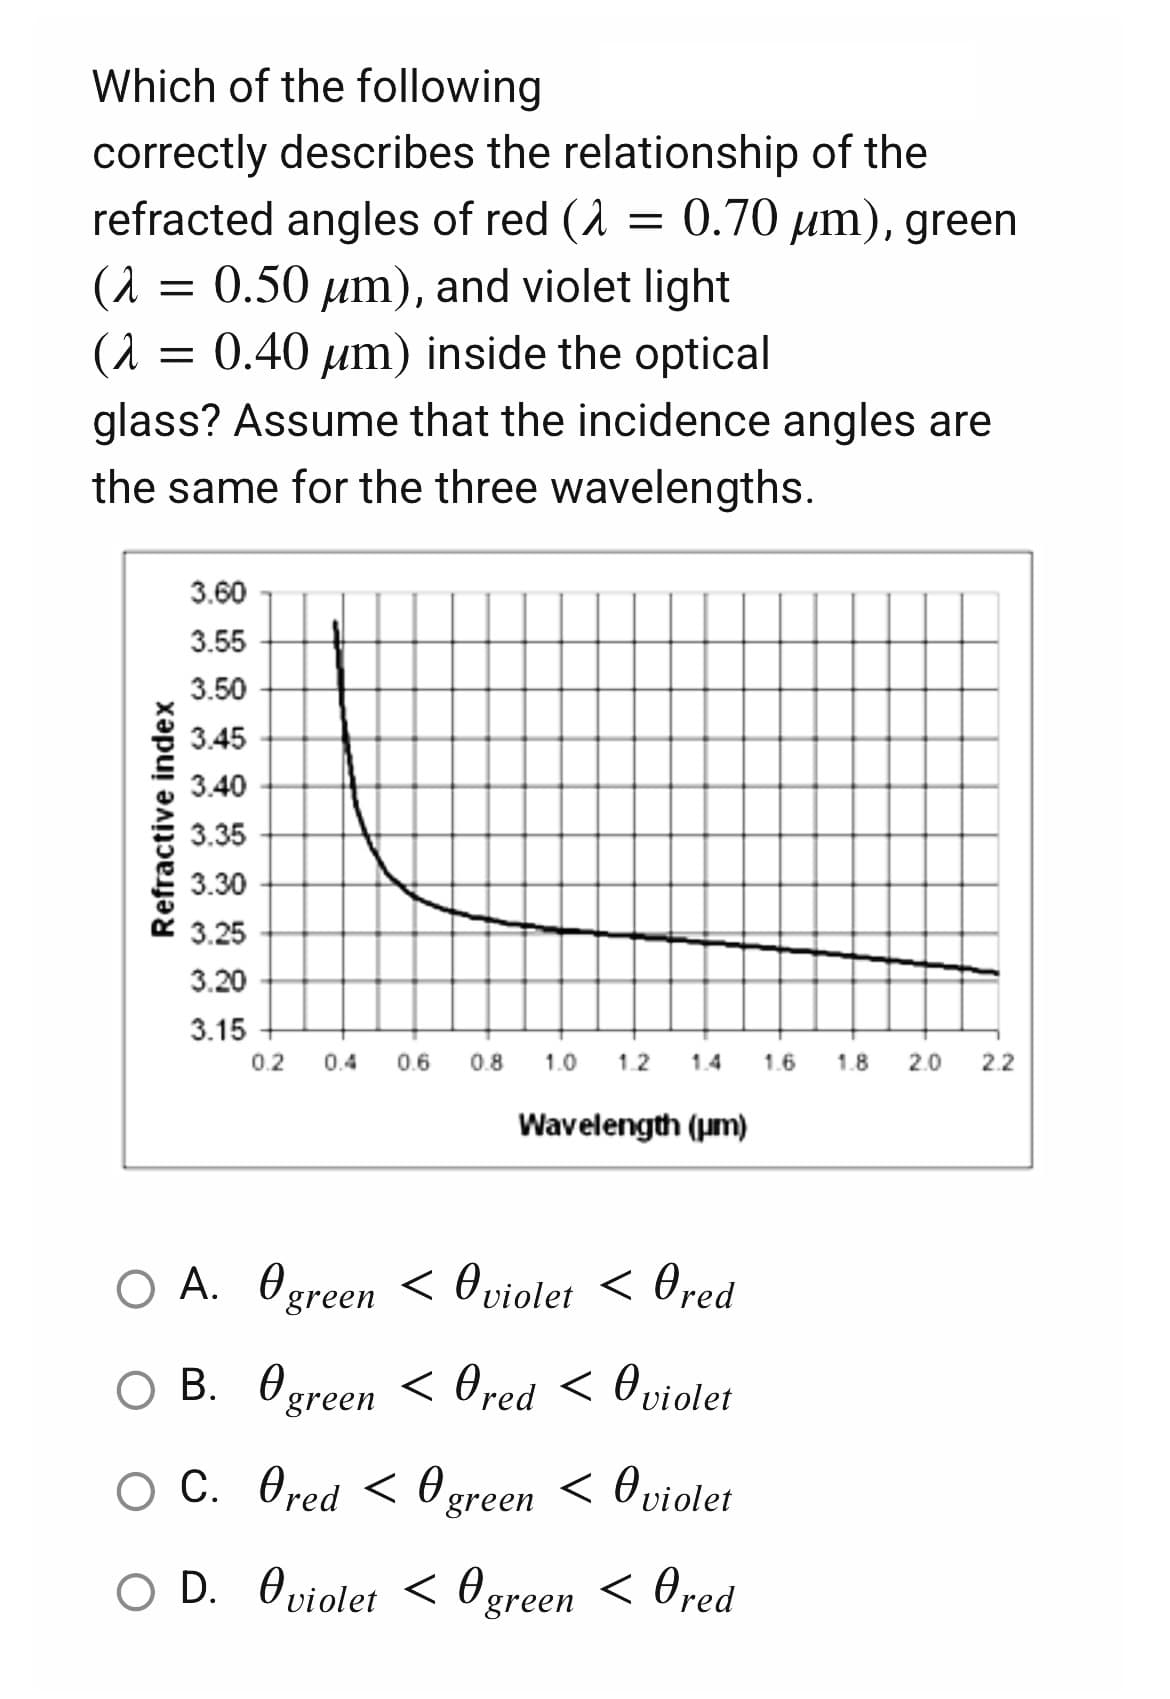 Which of the following
correctly describes the relationship of the
refracted angles of red (λ = 0.70 μm), green
(λ = 0.50 µm), and violet light
(a
=
0.40 μm) inside the optical
glass? Assume that the incidence angles are
the same for the three wavelengths.
3.60
3.55
3.50
3.45
3.40
3.35
3.30
3.25
3.20
3.15
0.2 0.4 0.6 0.8 1.0 1.2
1.6 1.8
Wavelength (μm)
OA. Ogreen < @violet < Ored
OB. Ogreen <red < violet
O C. Ored <green < Oviolet
OD. Oviolet < green < Ored
Refractive index
2.0 2.2